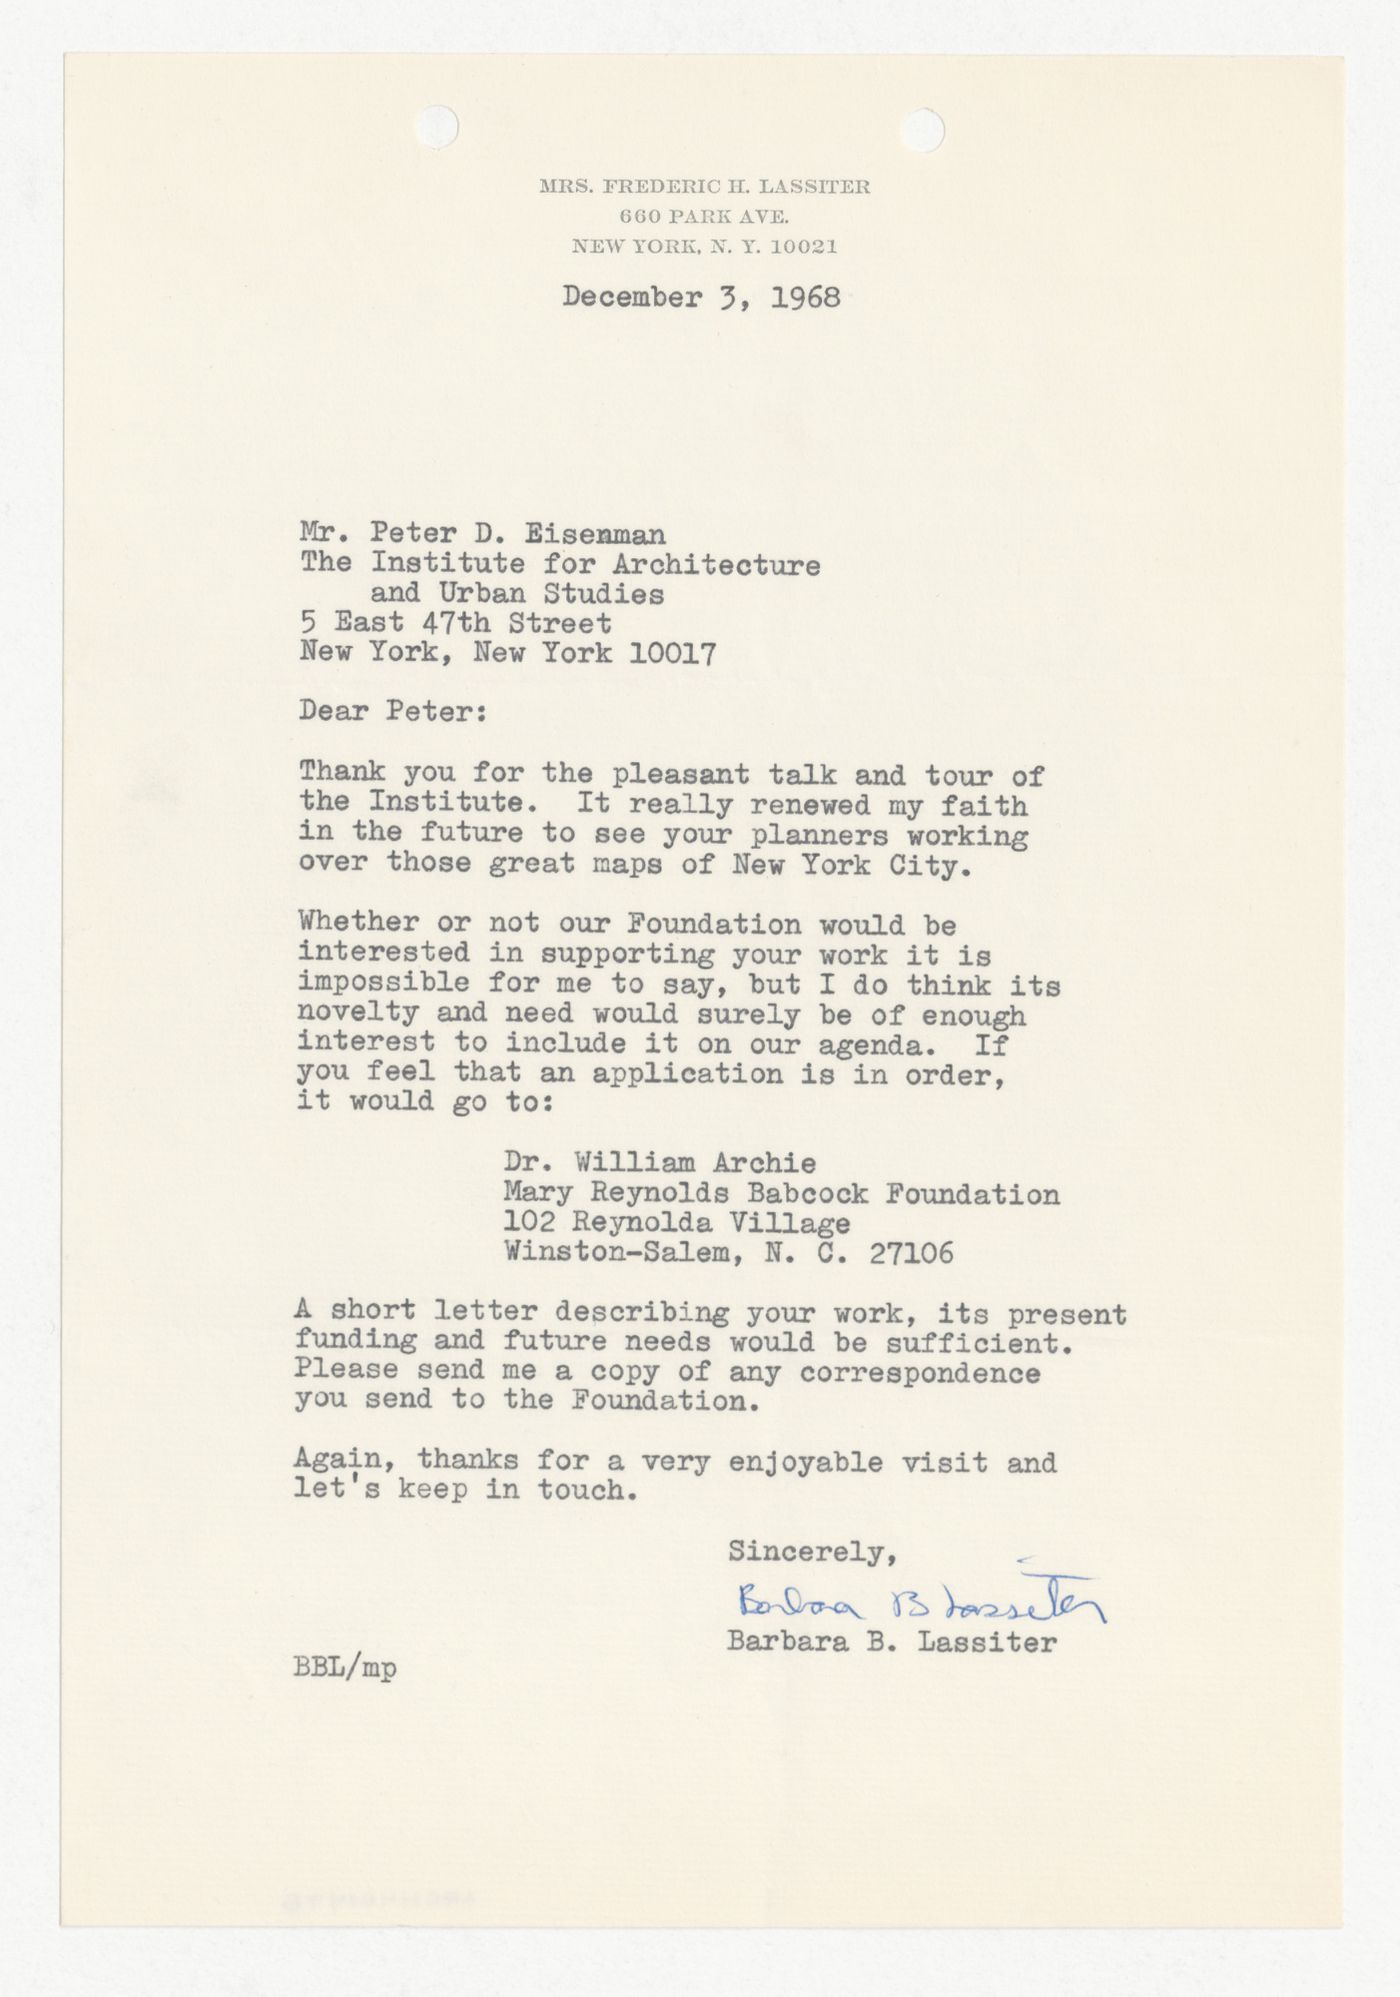 Letter from Barbara B. Lassiter to Peter D. Eisenman about funding from the Mary Reynolds Babcock Foundation